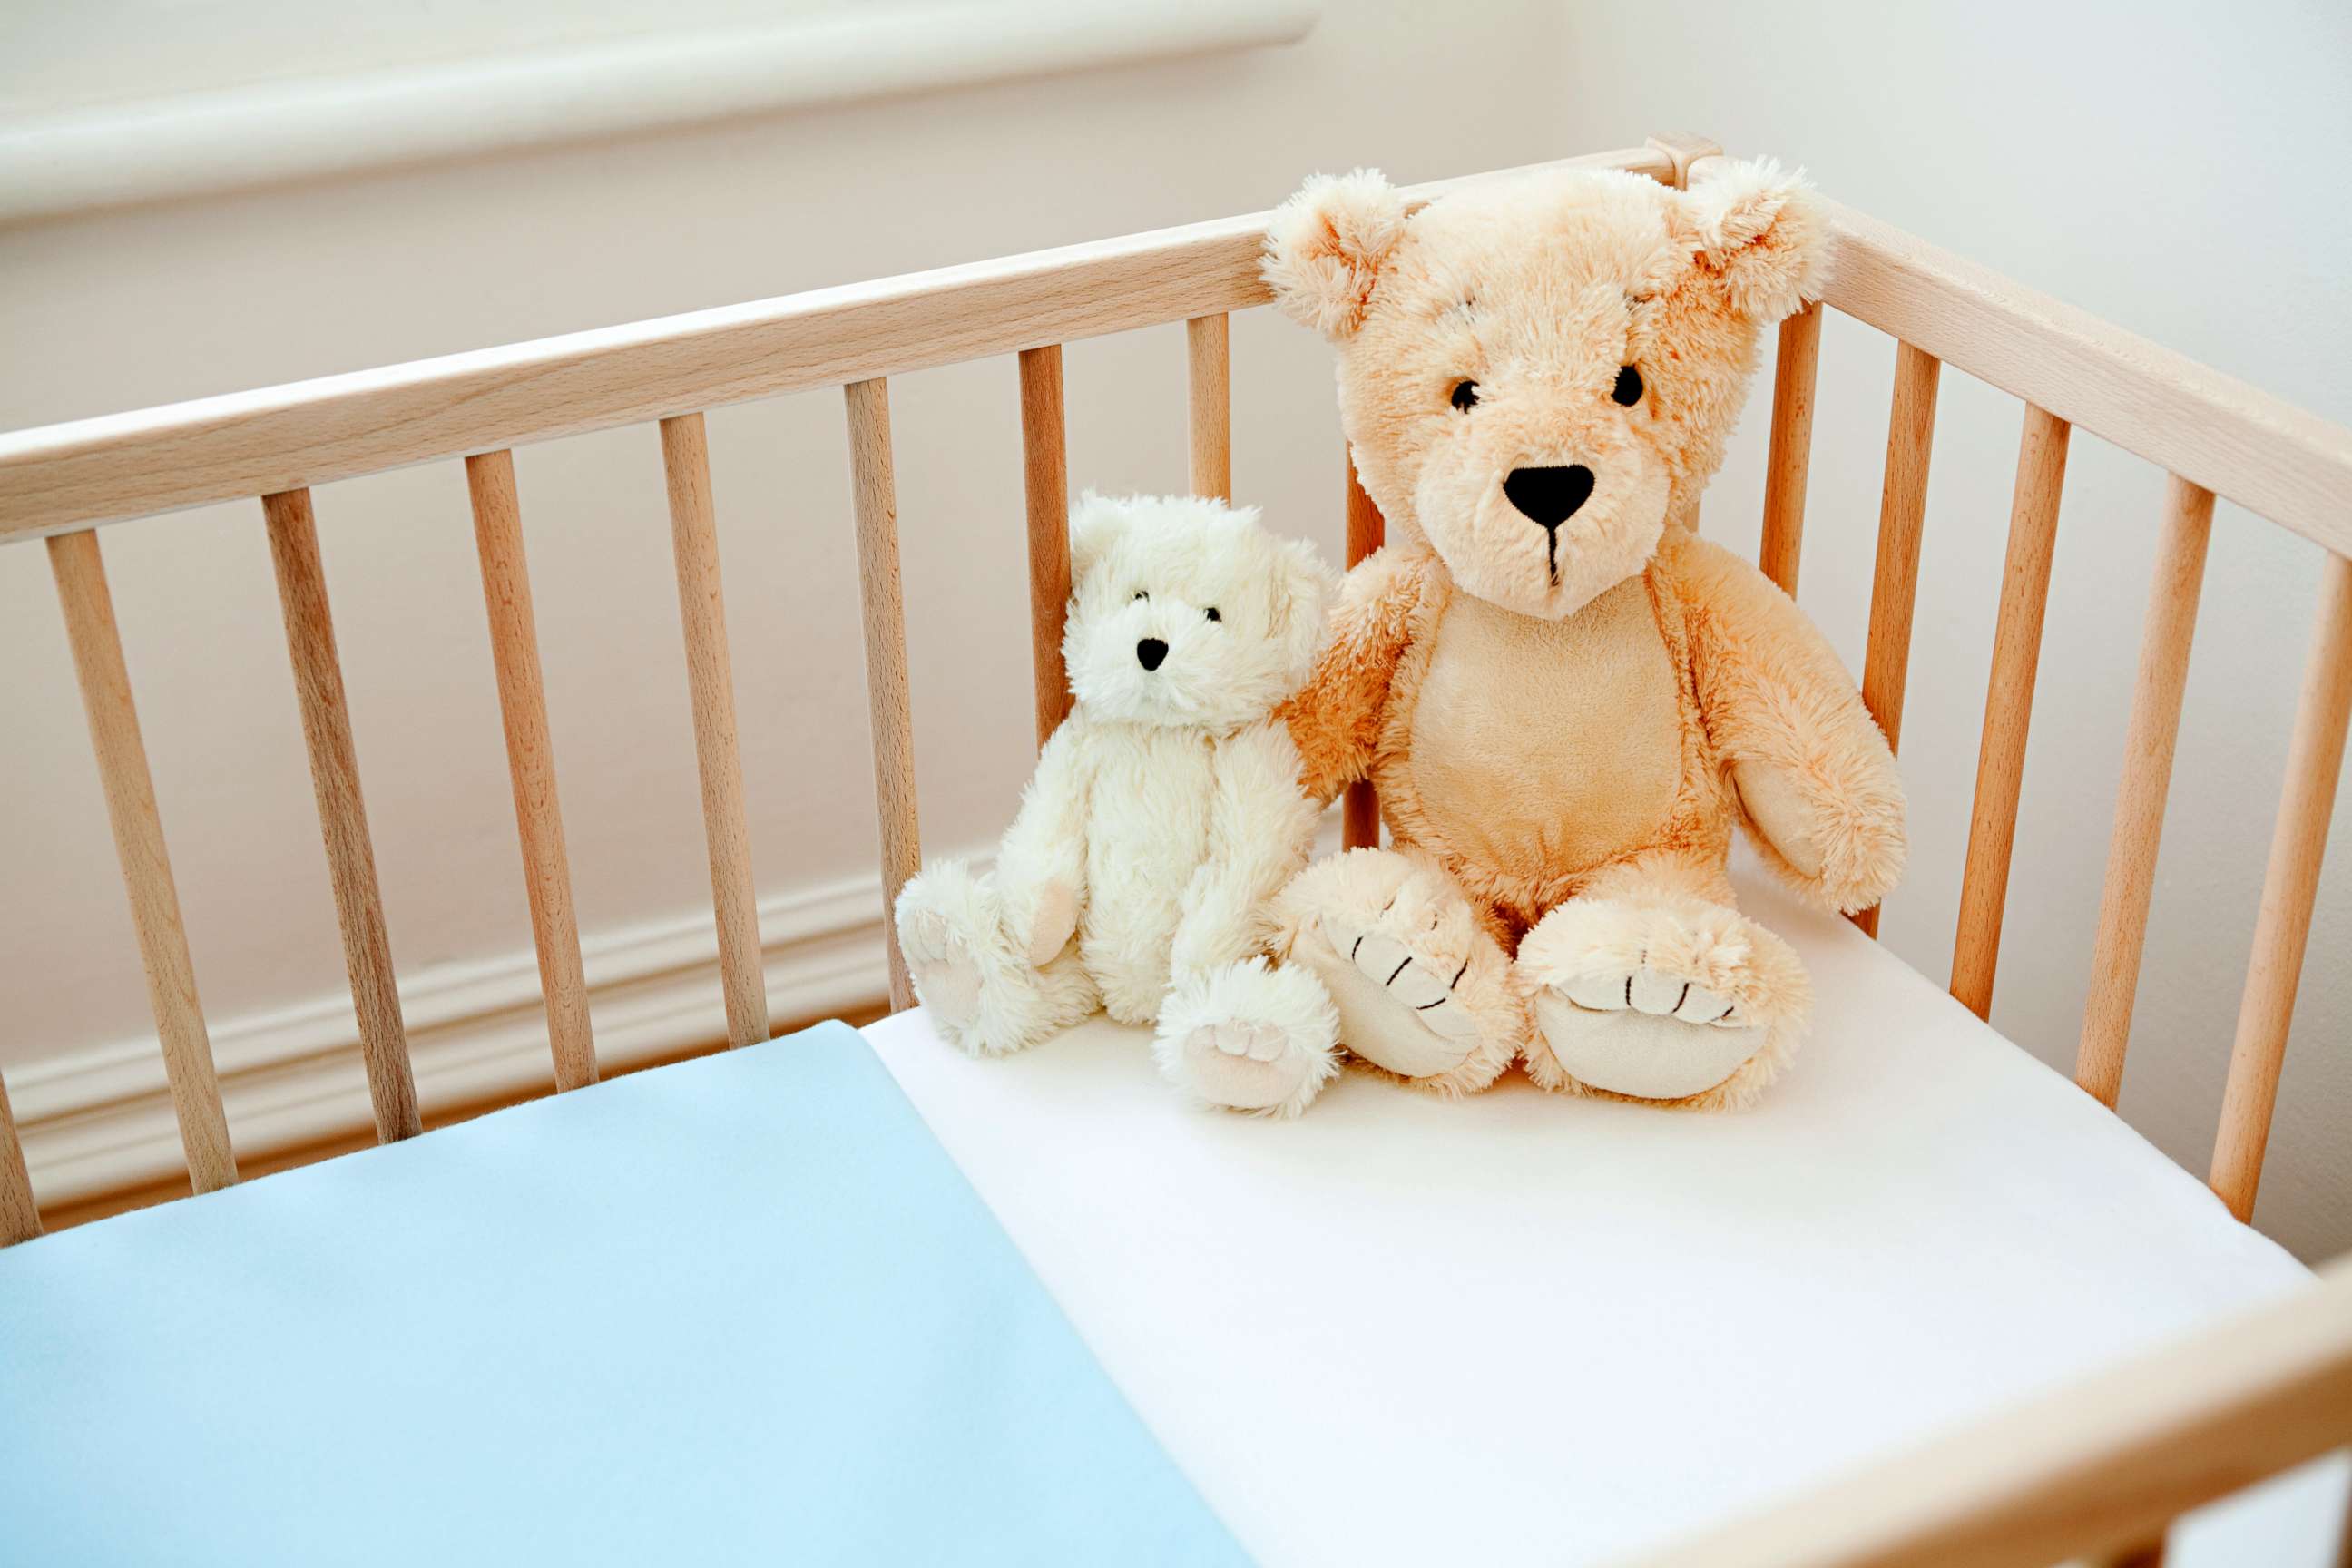 Commission approves new safety standards for crib mattresses - ABC News